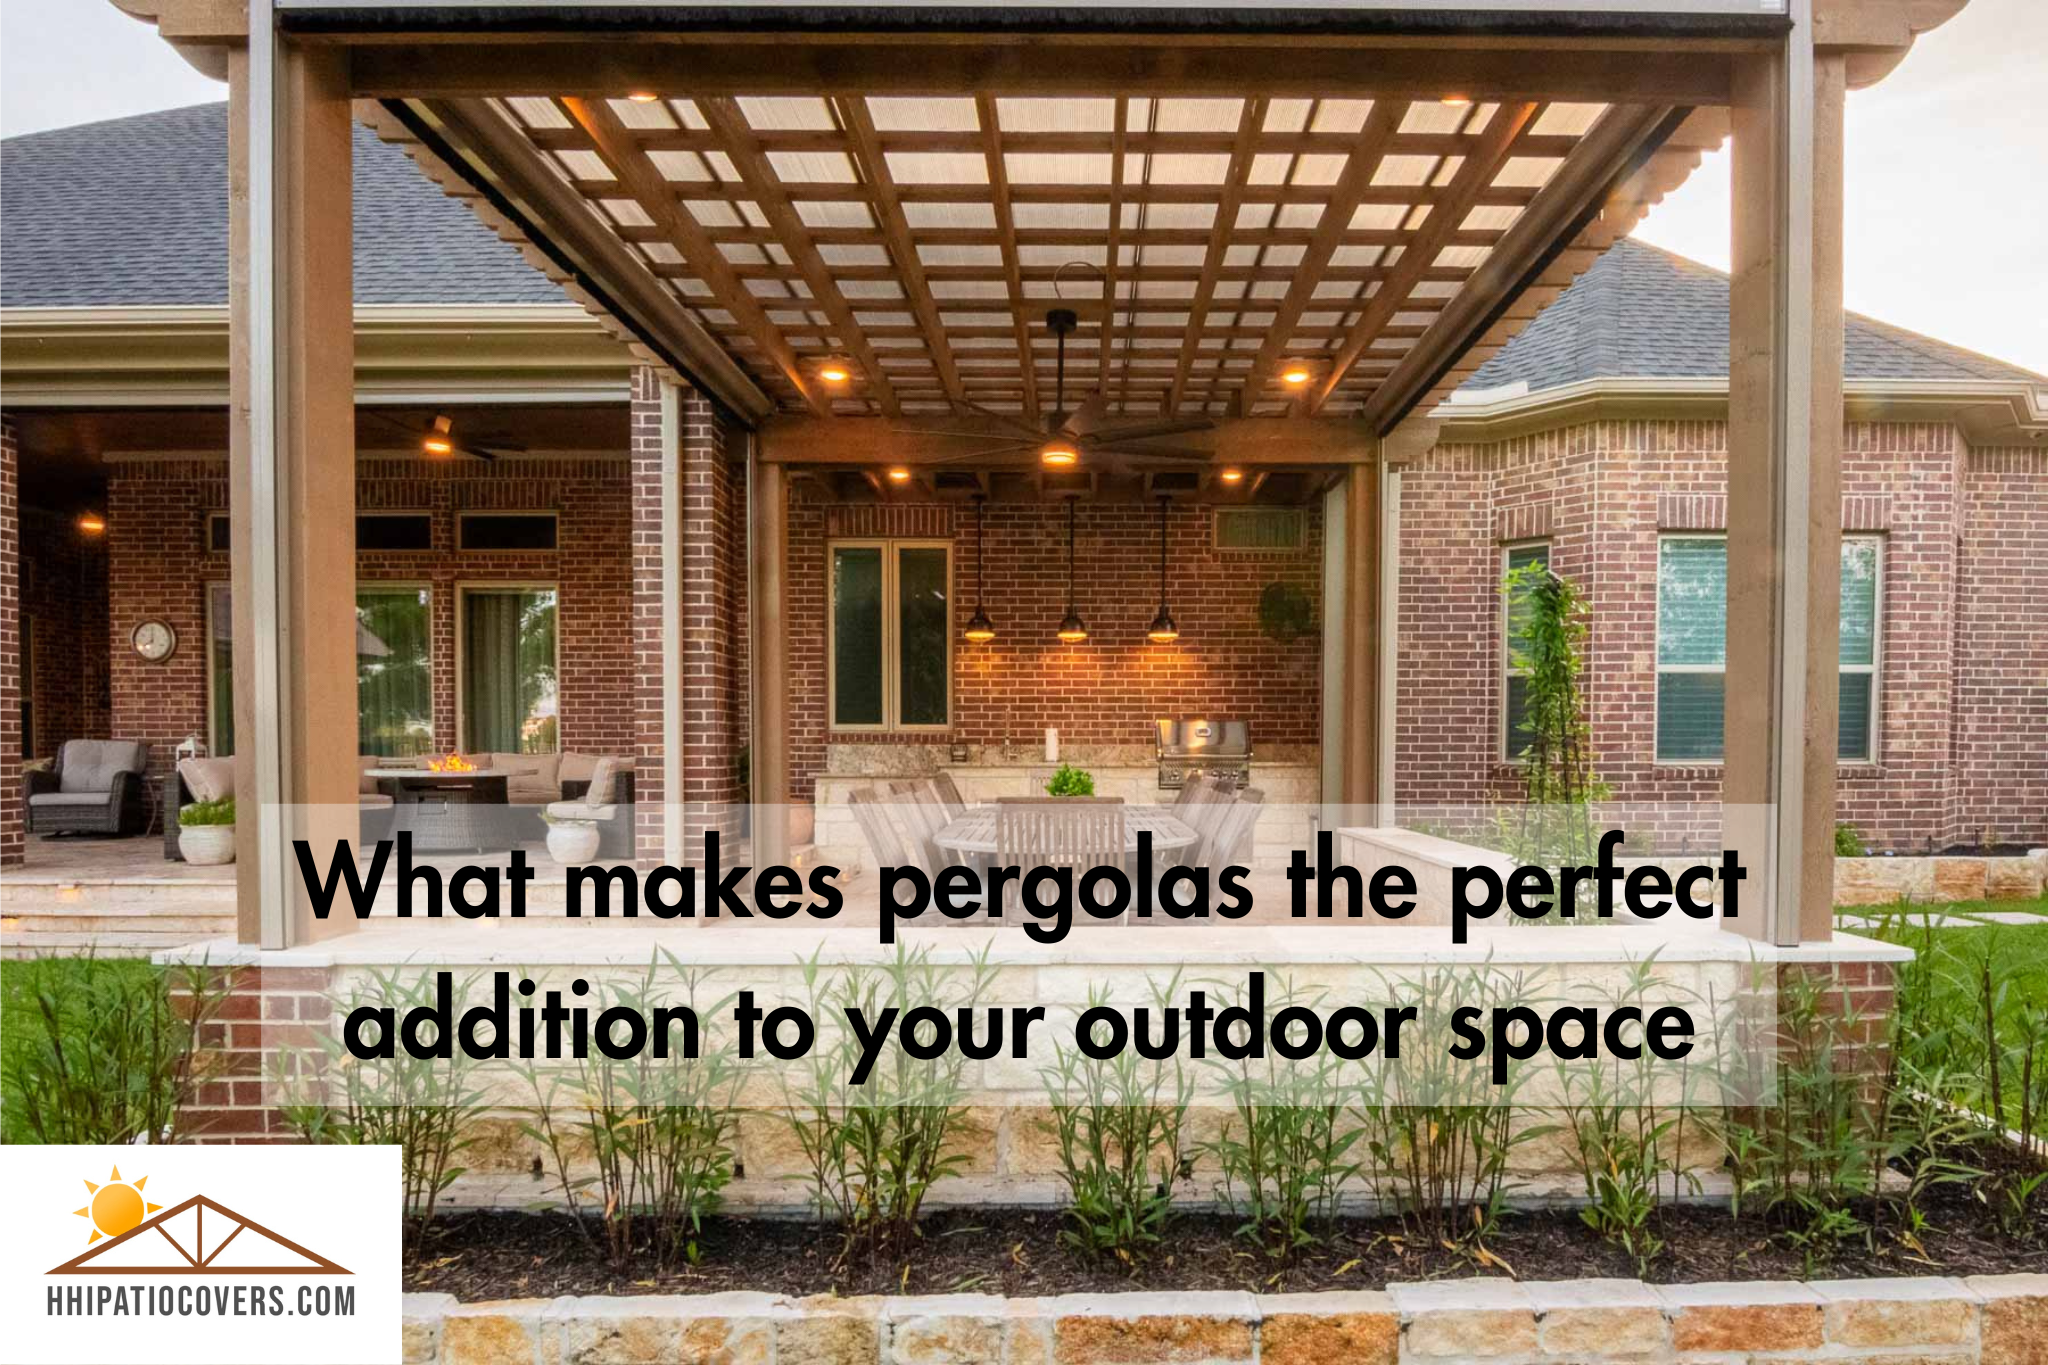 What makes pergolas the perfect addition to your outdoor space